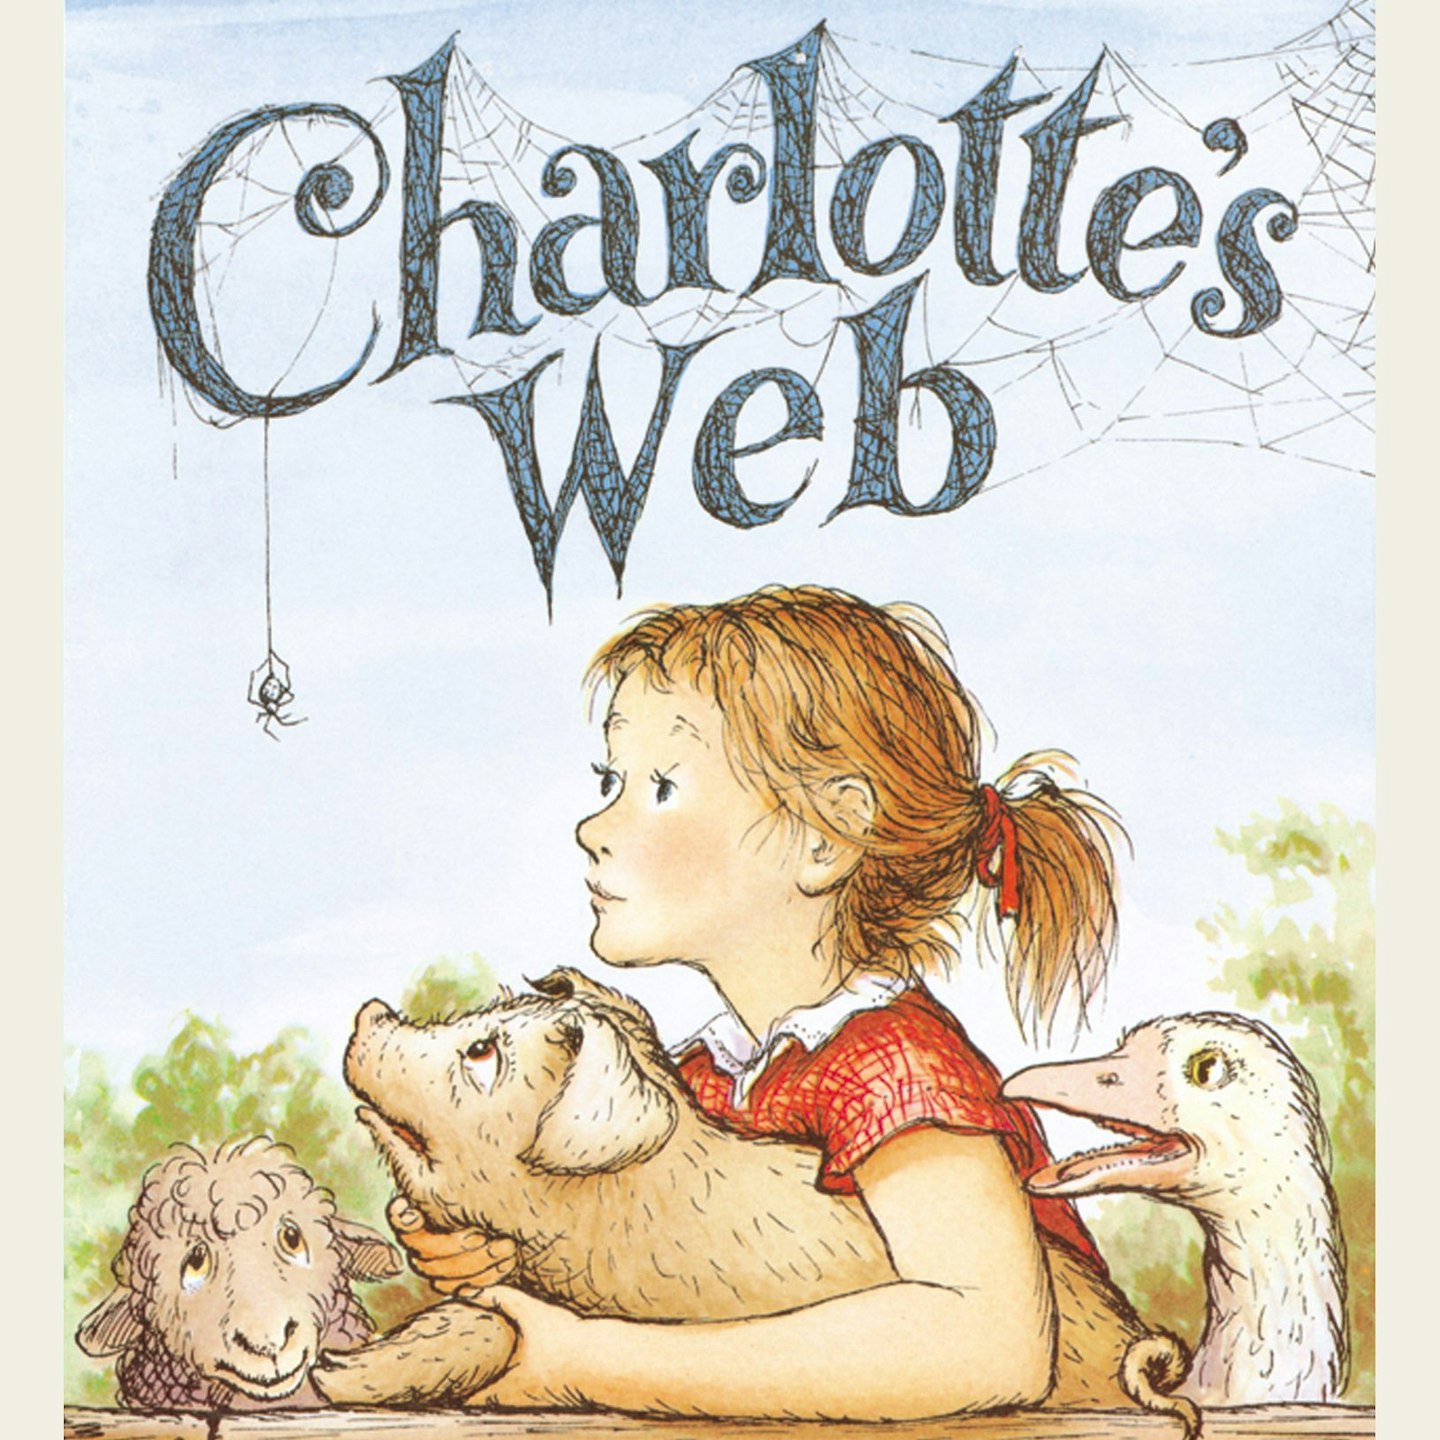 charlottes-web-world-book-day-ideas-outfits-costumes